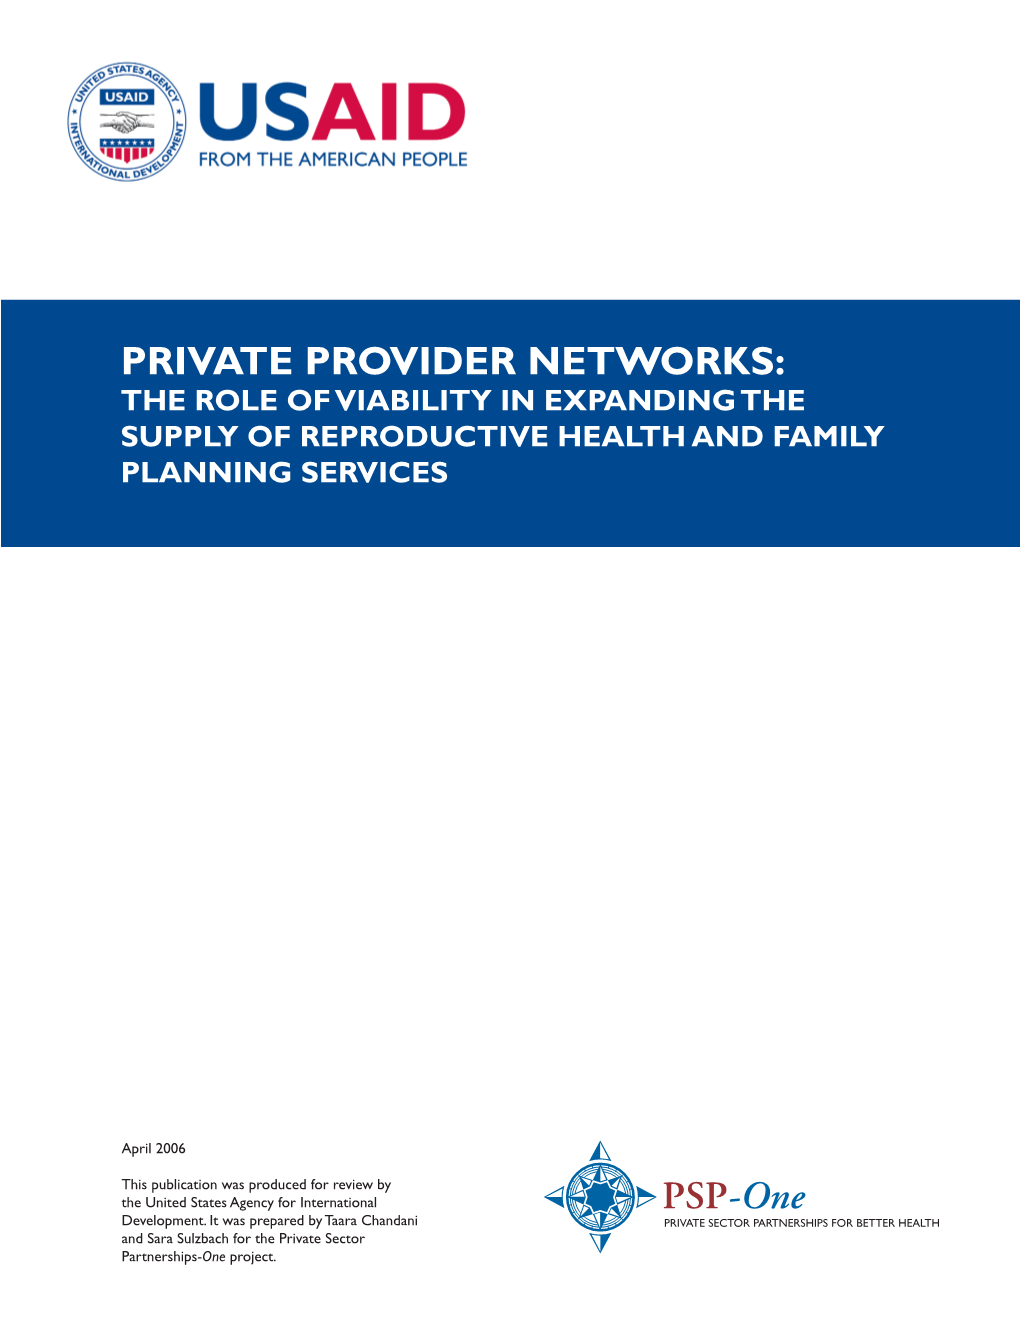 Private Provider Networks: the Role of Viability in Expanding the Supply of Reproductive Health and Family Planning Services